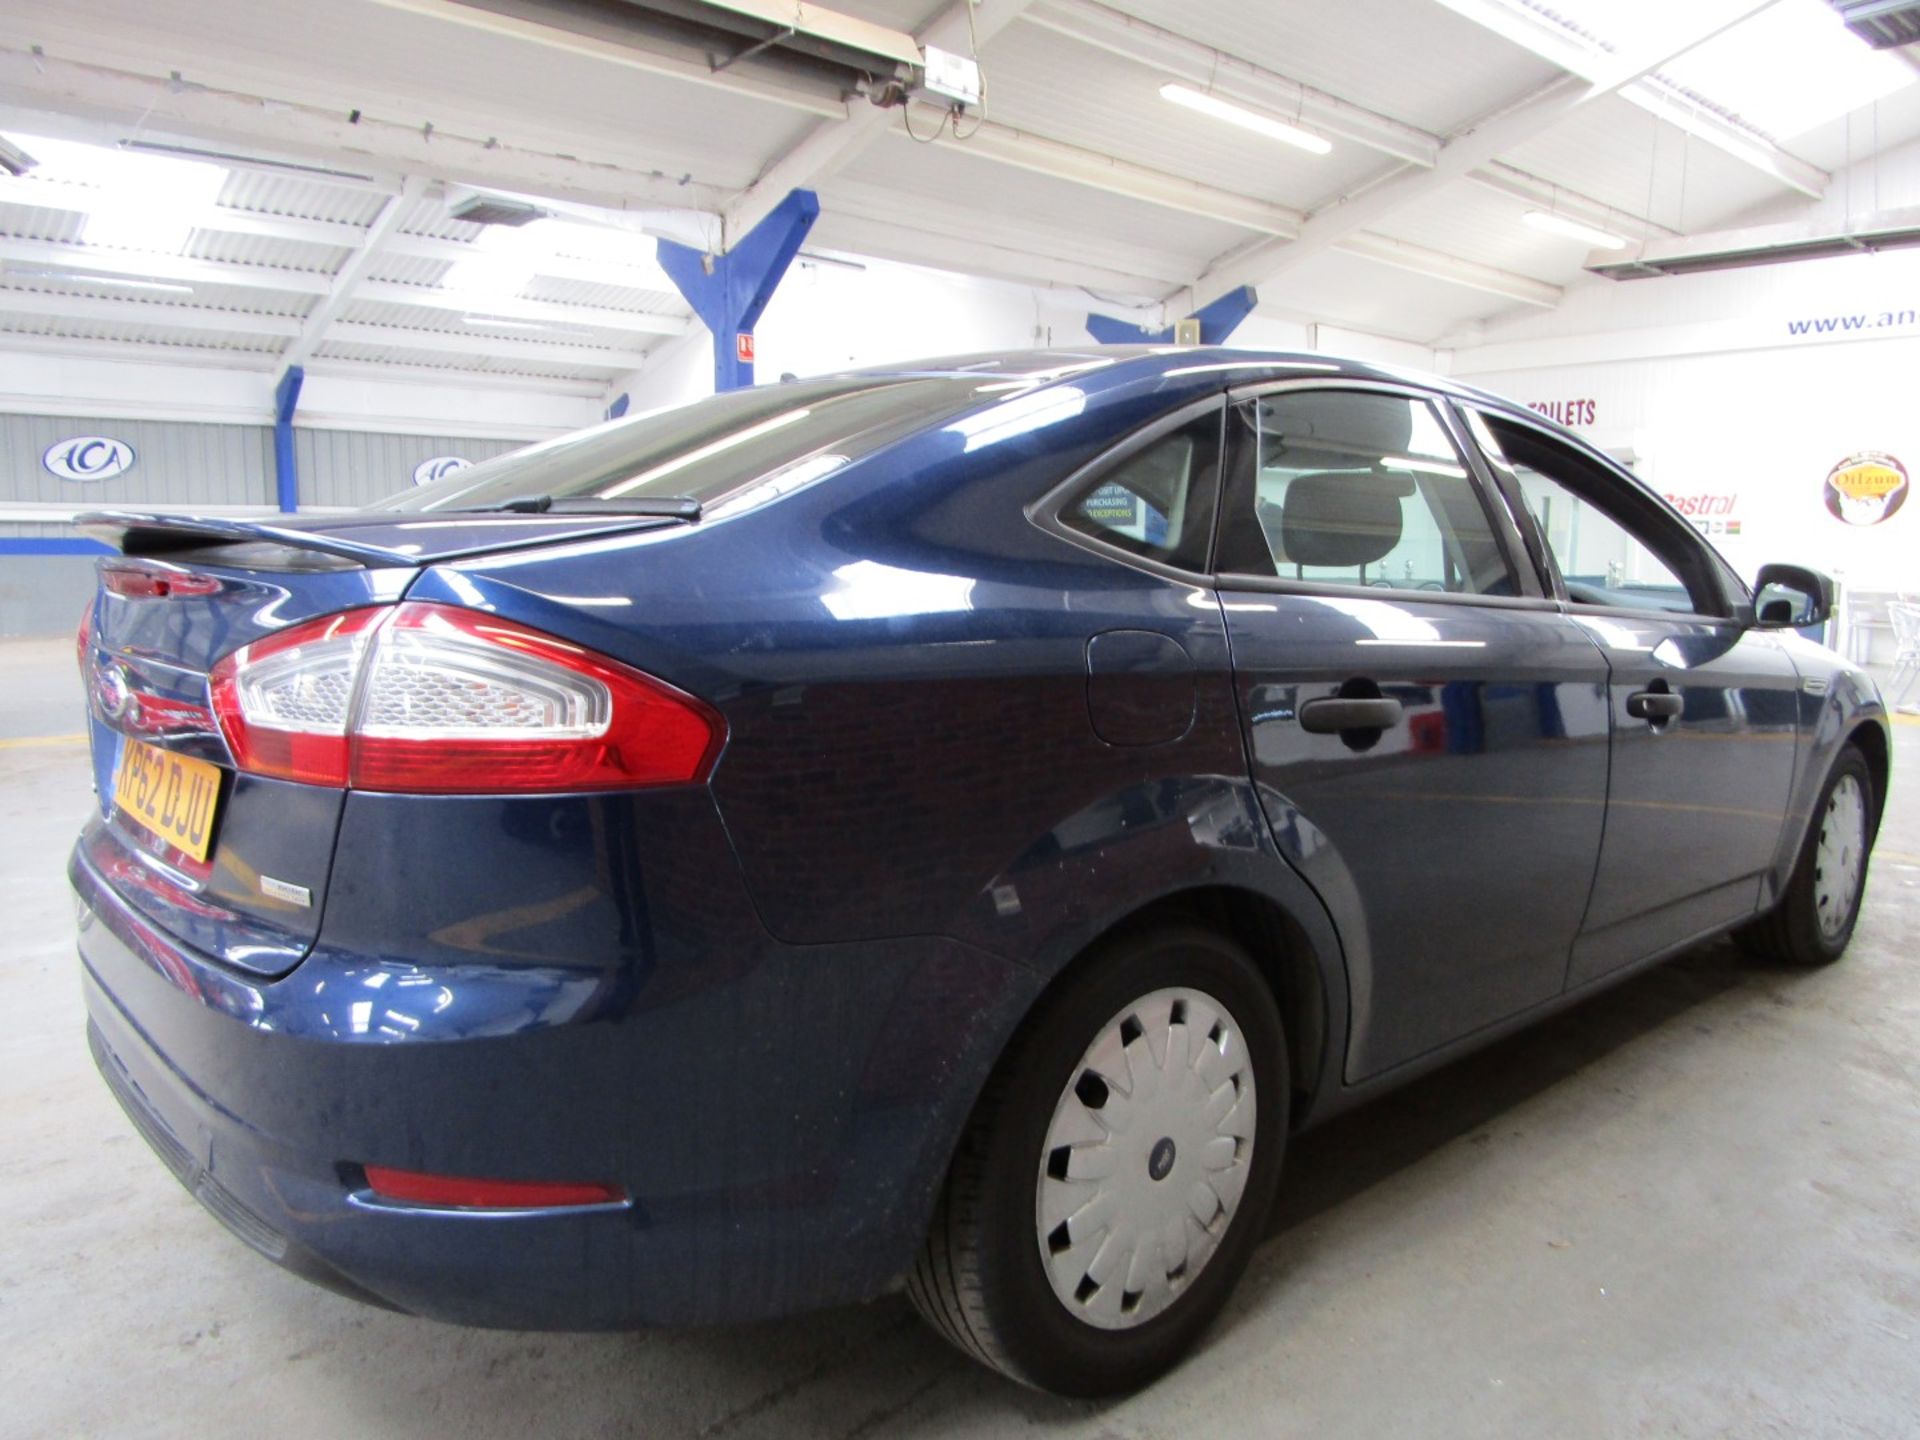 62 12 Ford Mondeo Edge TDCI - Image 15 of 19